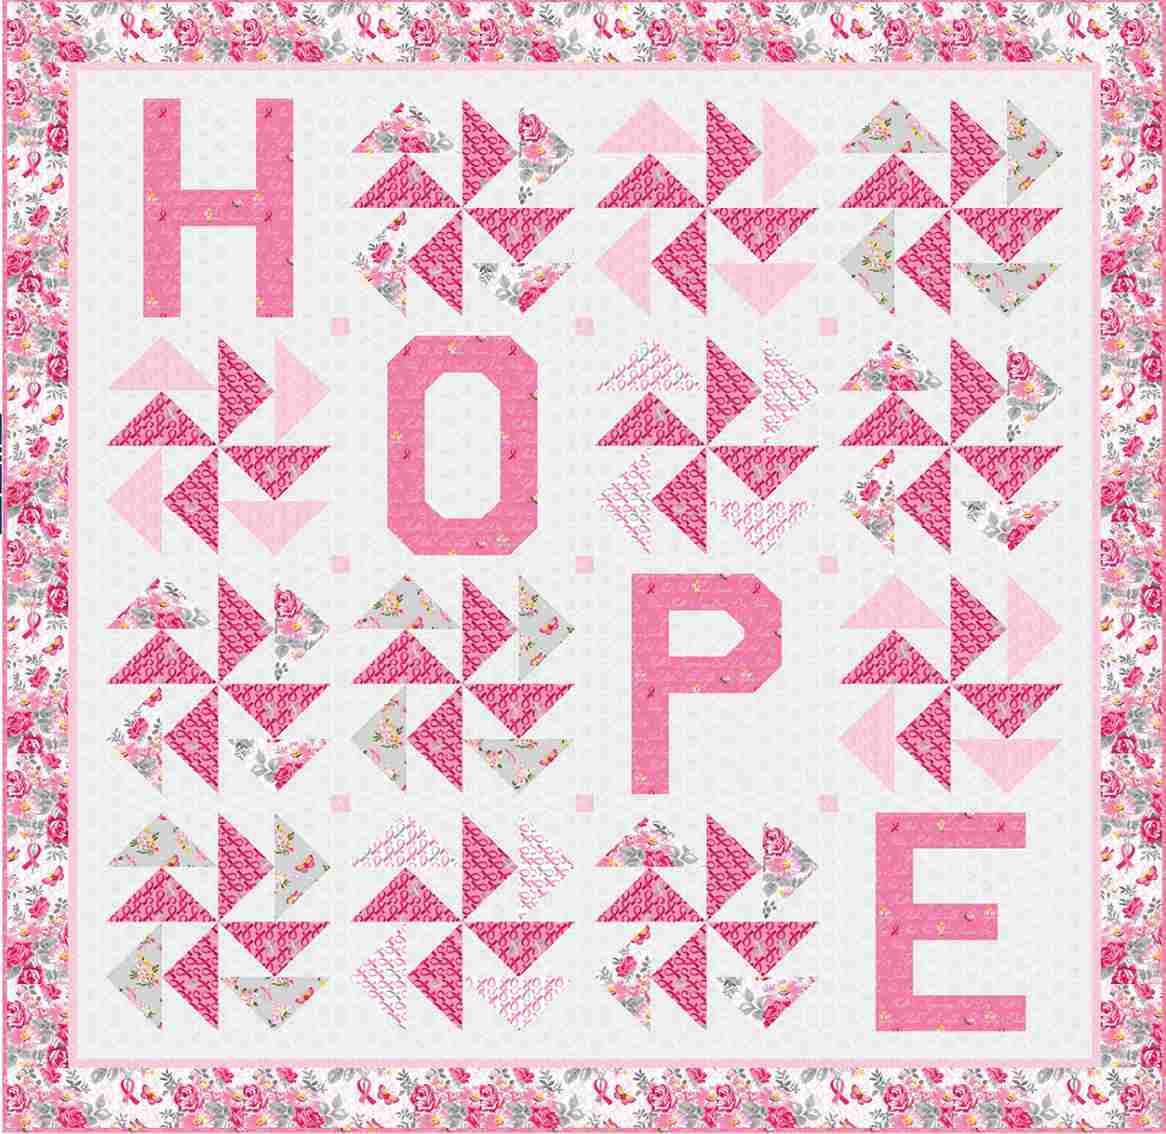 Hope - Free Quilt Pattern